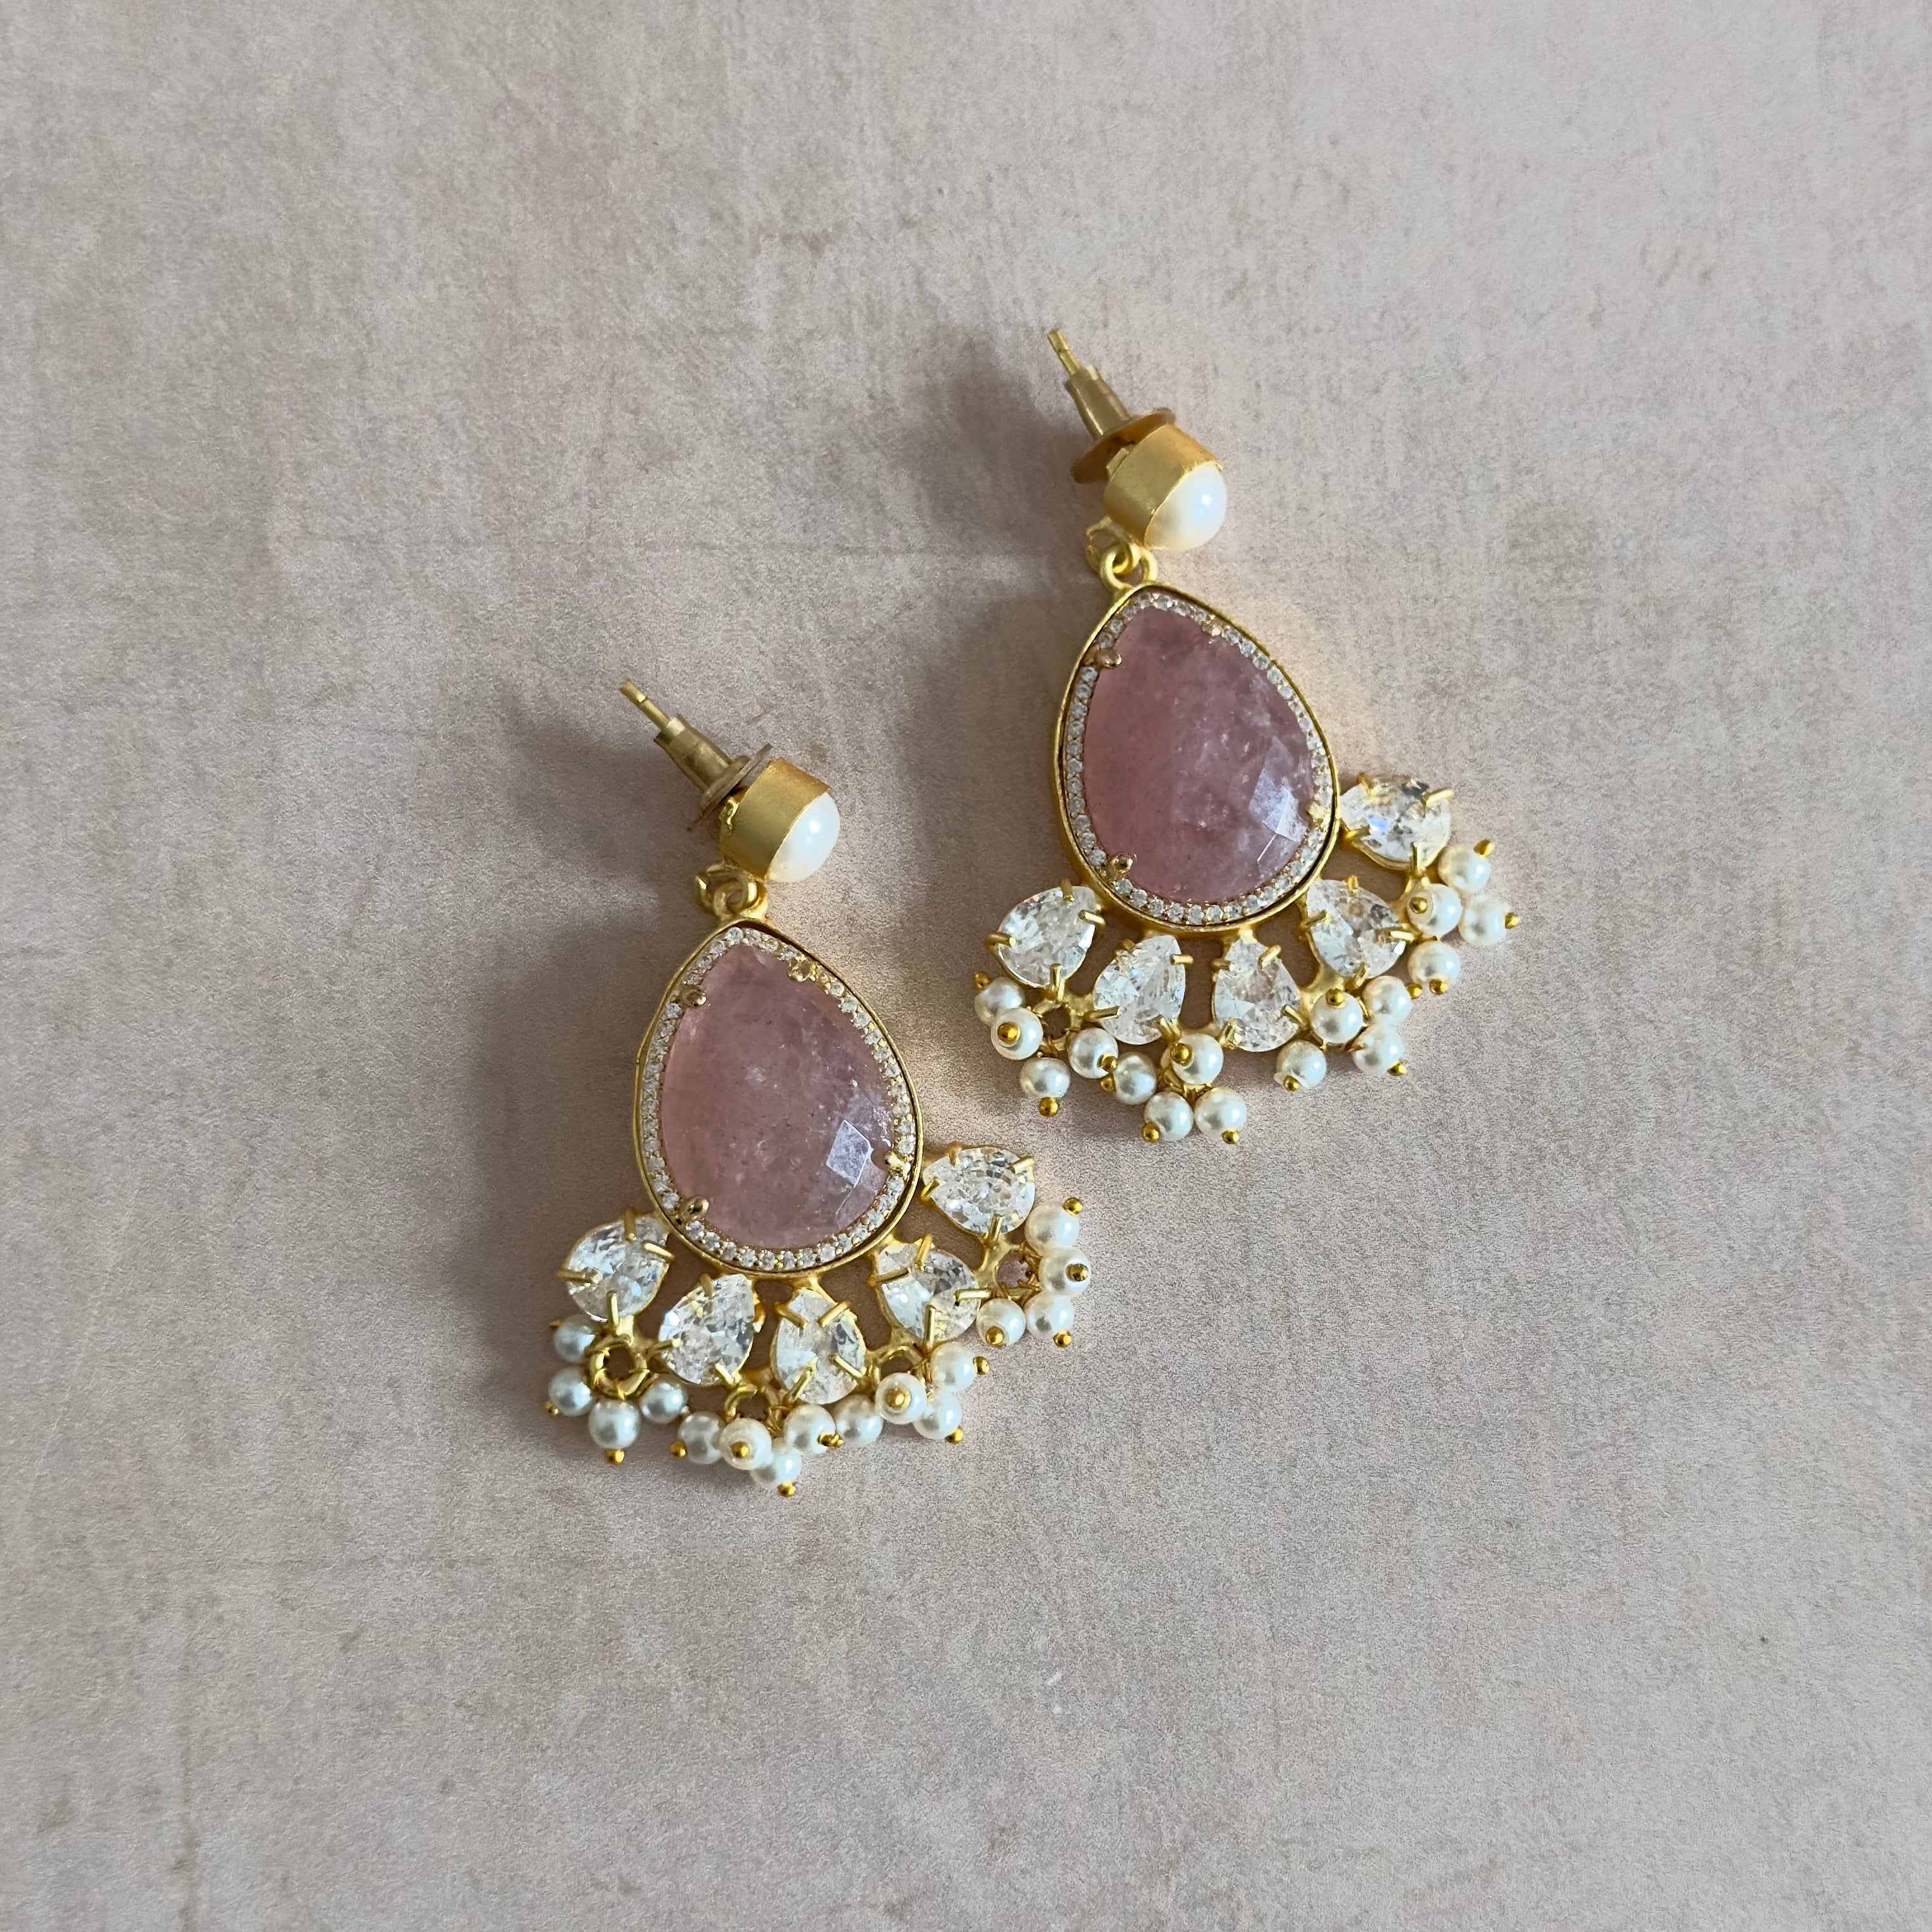 Bring out your inner grace with our Ciana Pink Crystal Pearl Drop Earrings. These rustic pink crystal stones, accented with cubic zirconia and a shimmering pearl, will add a touch of elegance to any outfit. Elevate your style and make a statement with these stunning earrings!